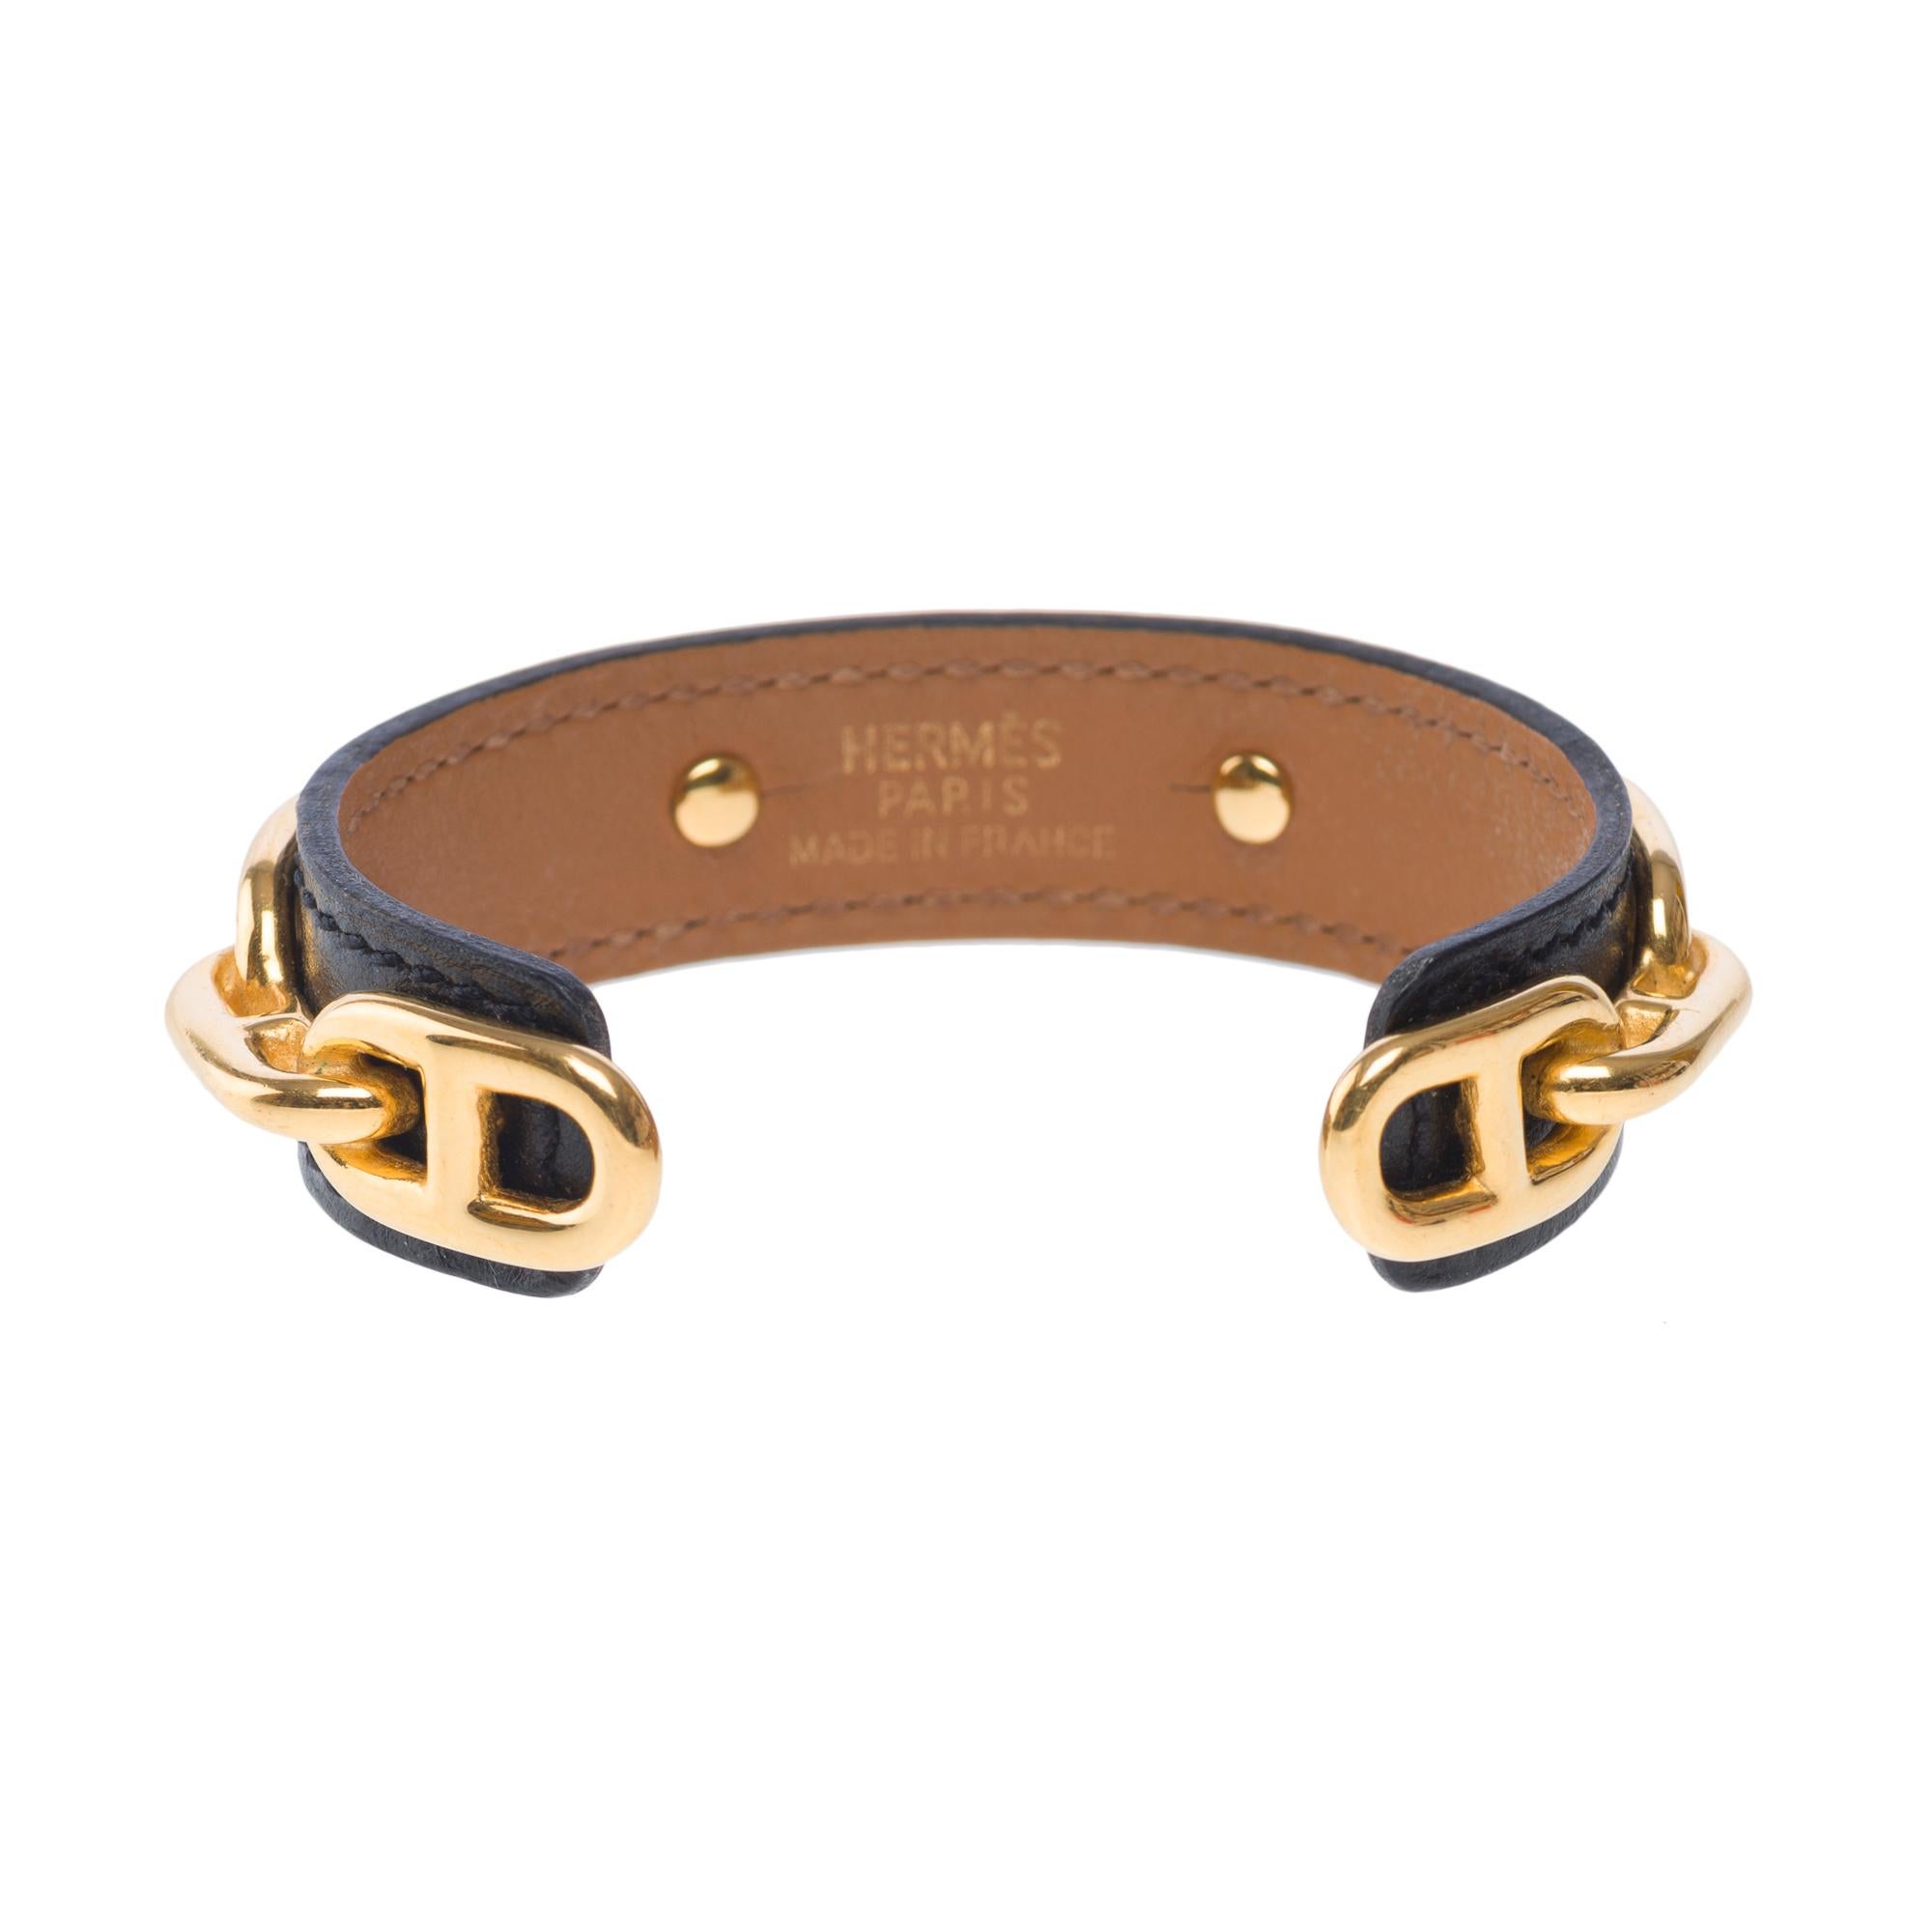 Women's Very Chic Hermès Chaine D'Ancre bracelet in black leather, GHW